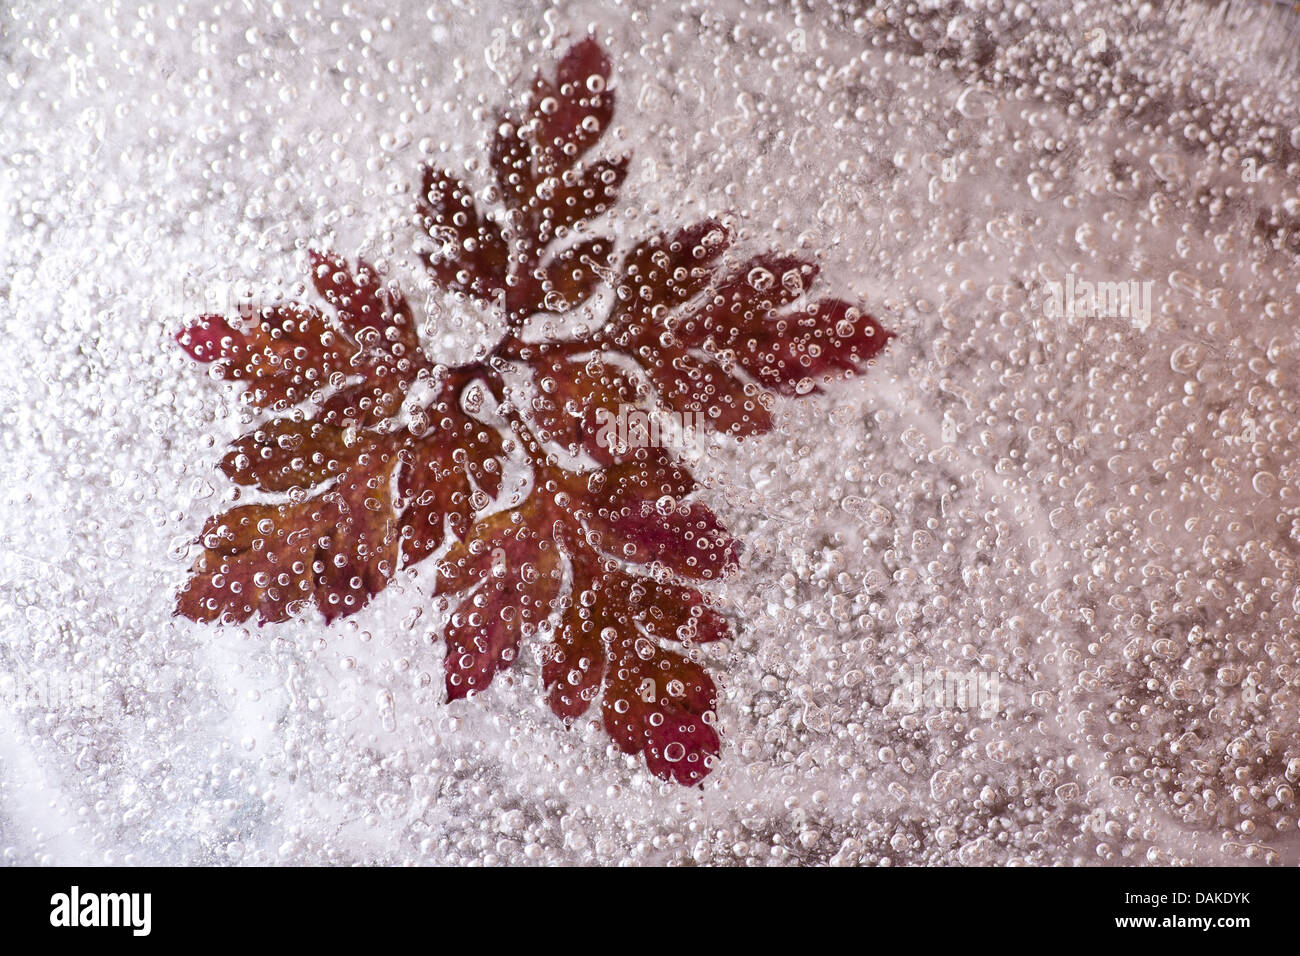 Frozen leaf in the ice. Stock Photo